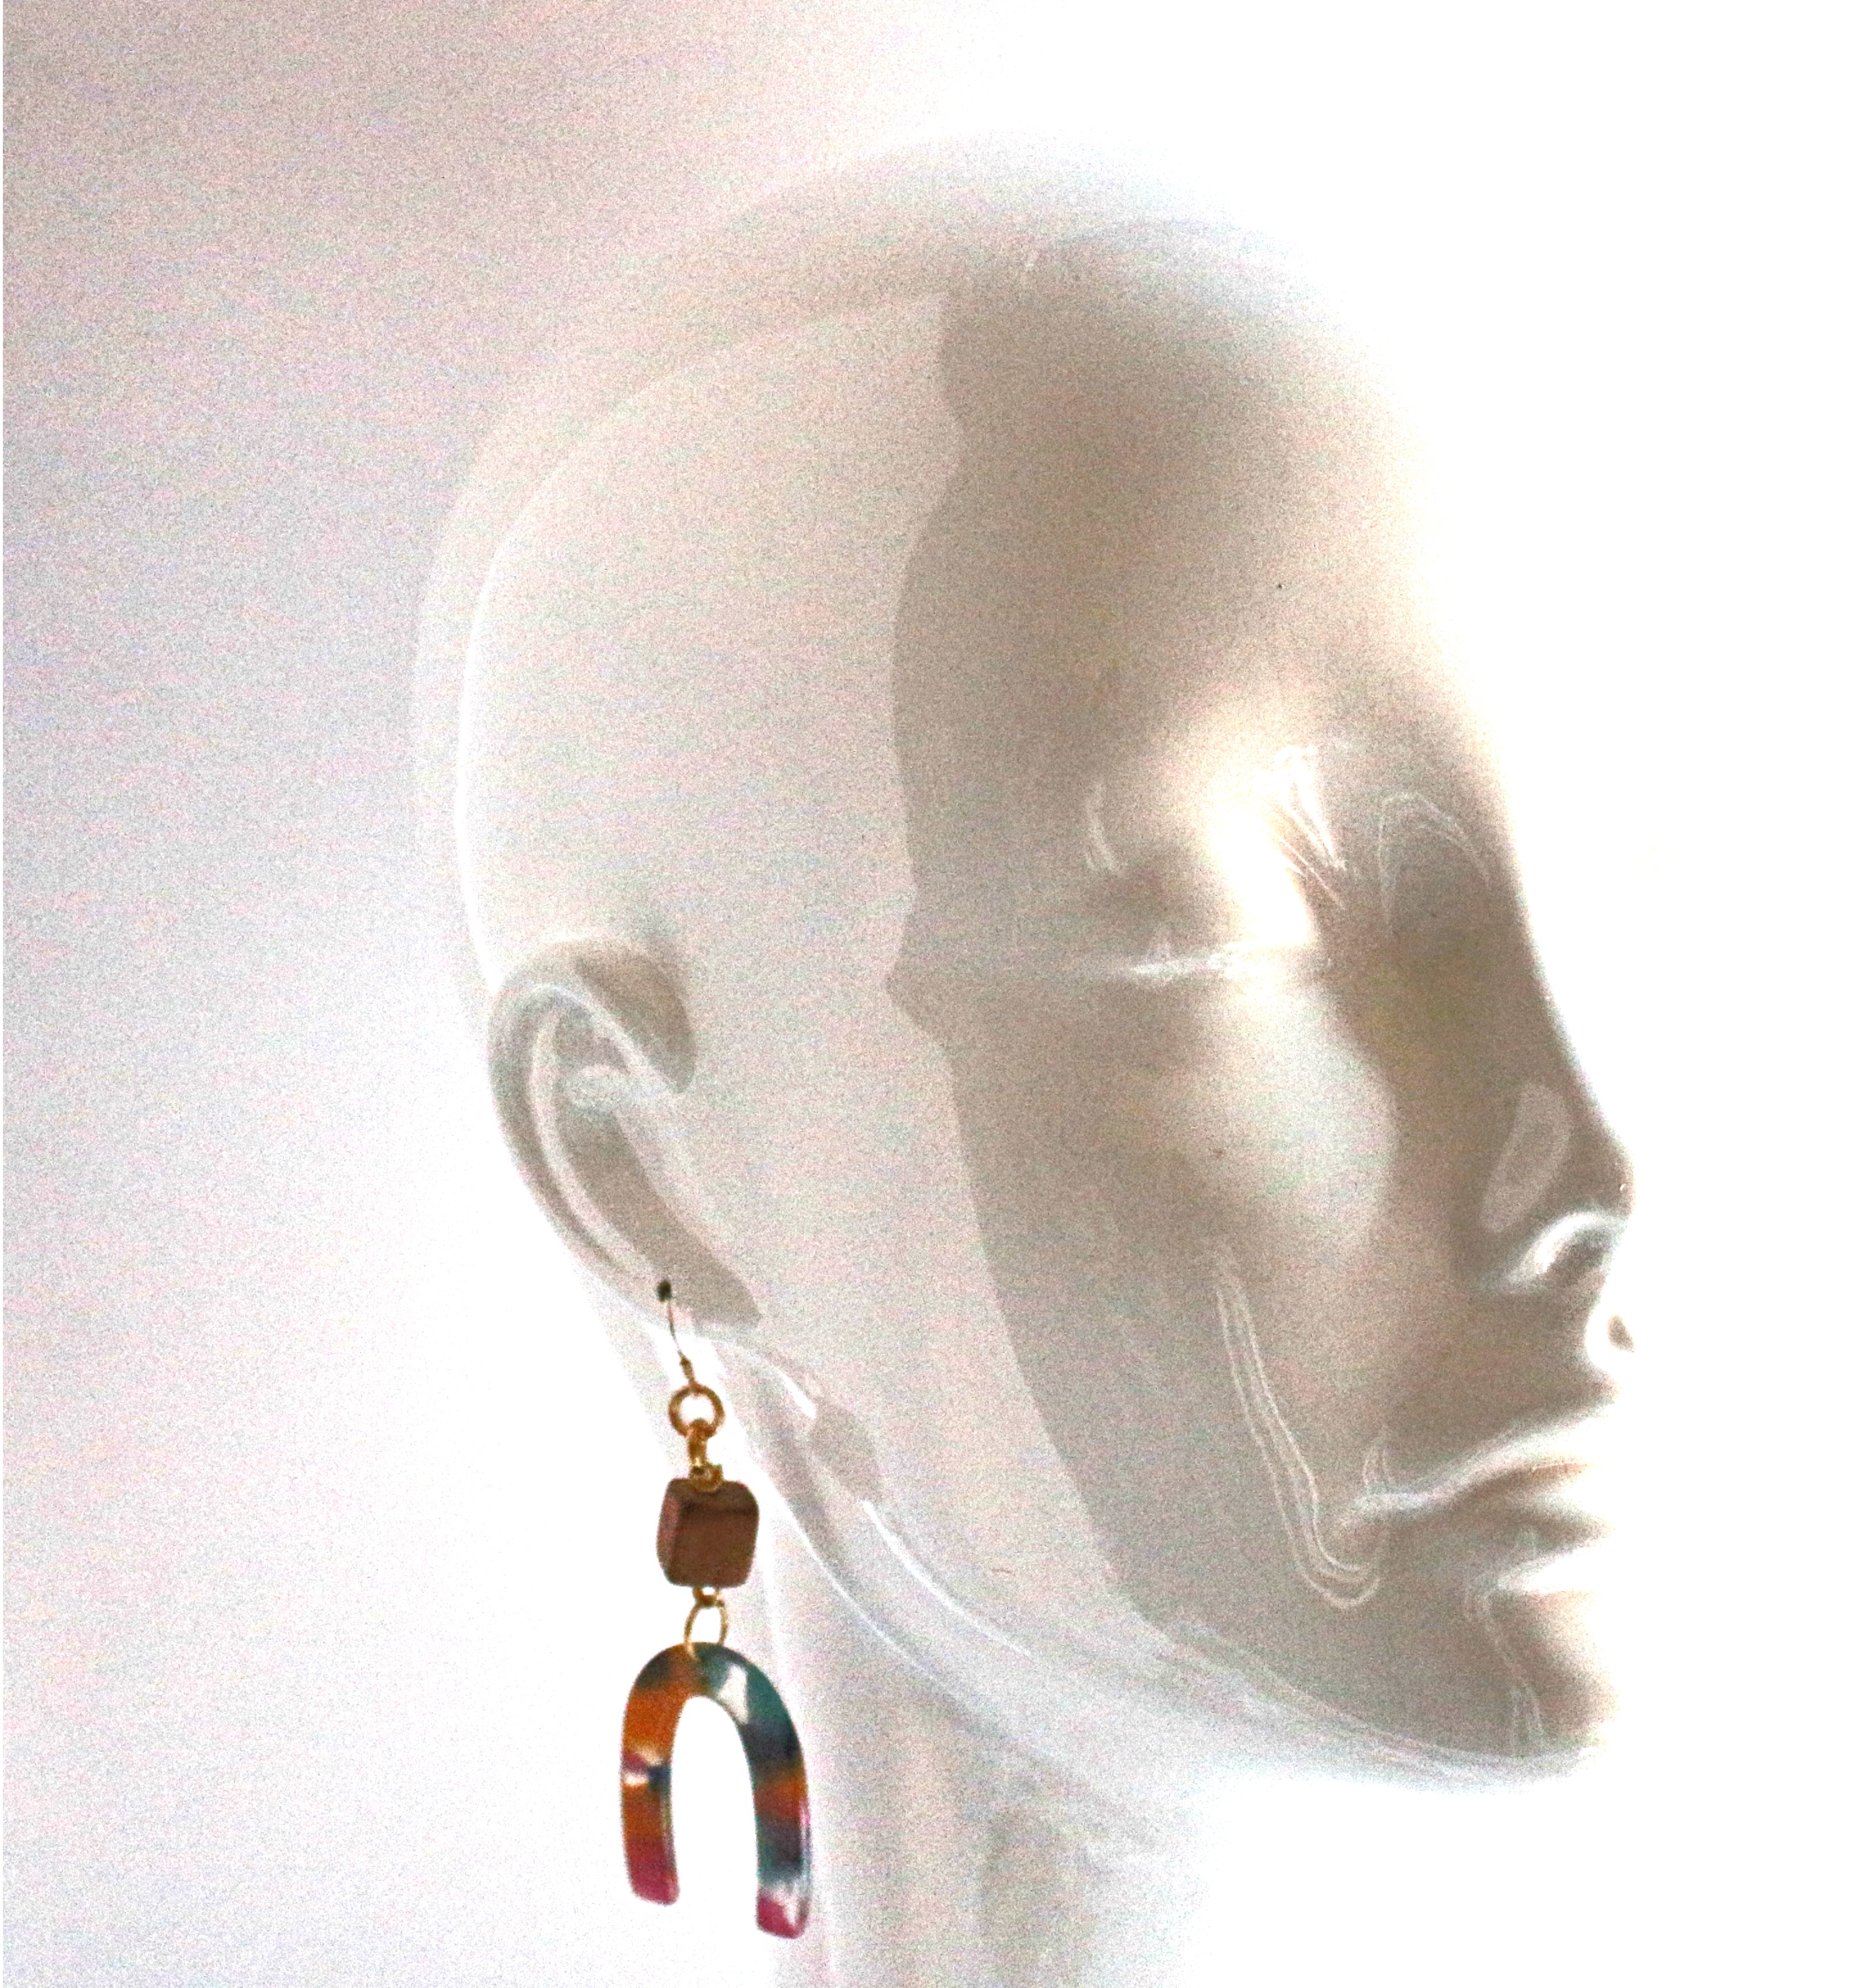 Nora Resin natural lightweight earrings with gold filled earring hooks. Materials are Resin and Wood